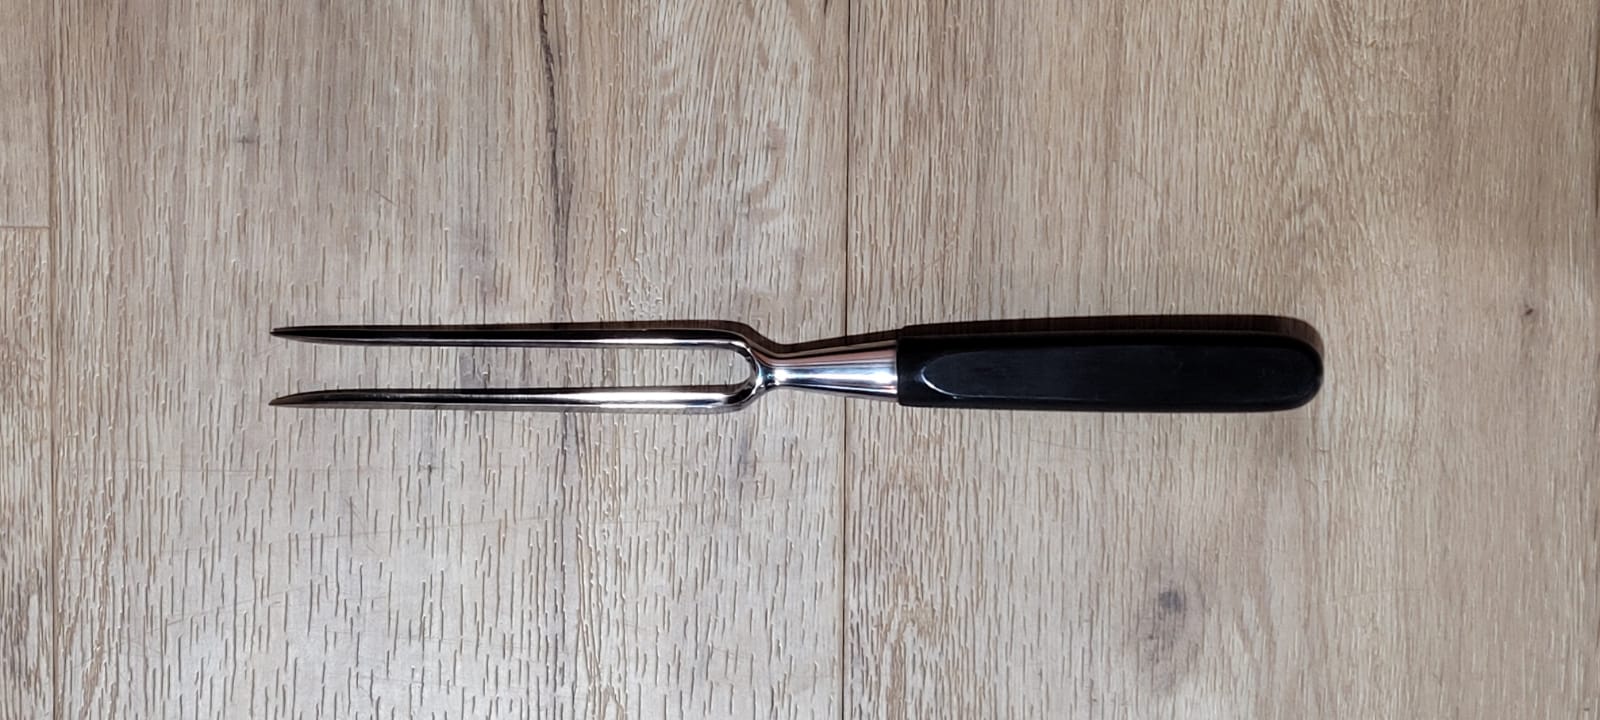 Victorinox Forged Carving Fork Black